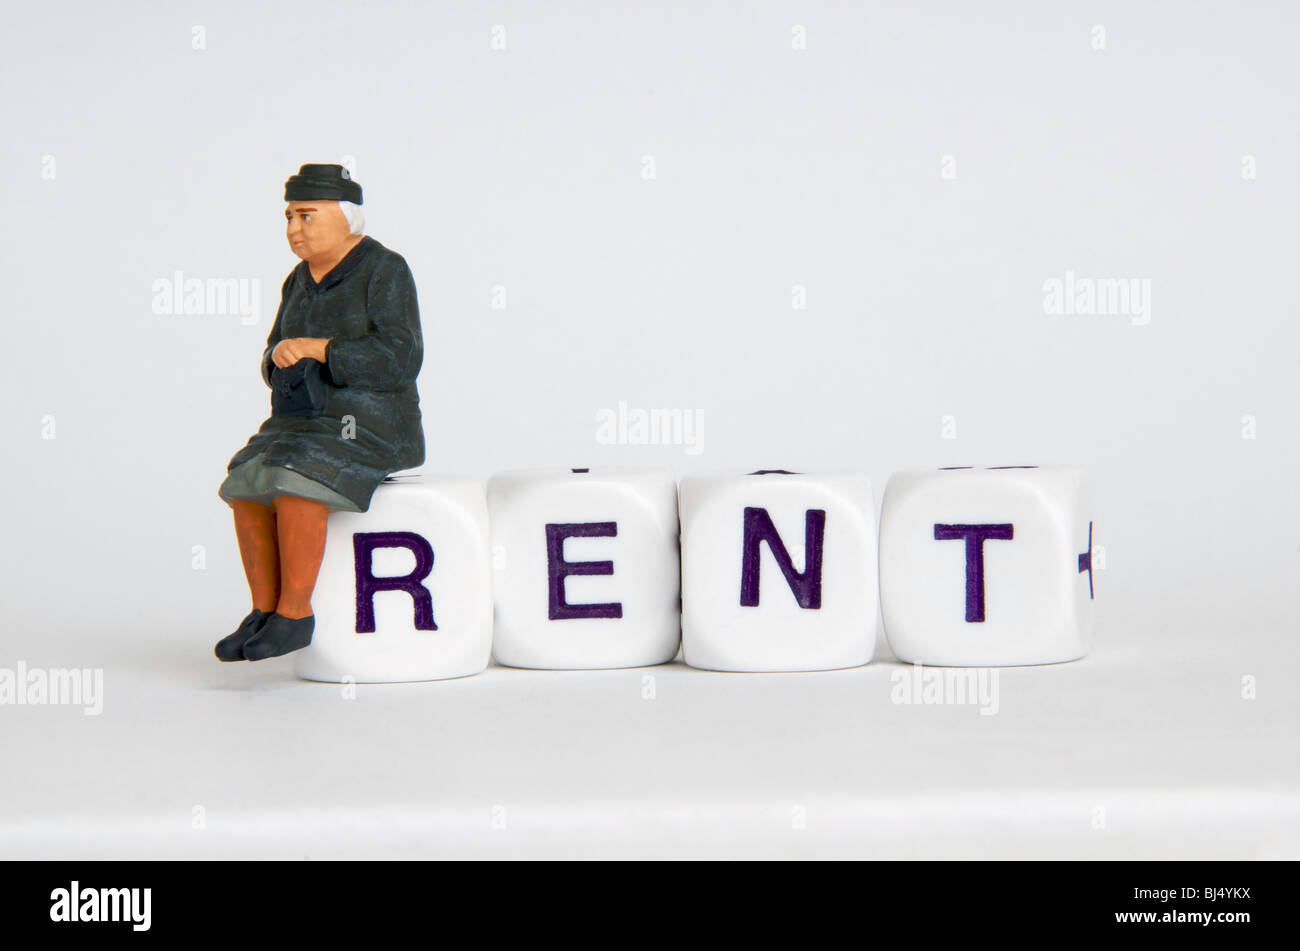 Old lady / old people and rent / housing concept Stock Photo